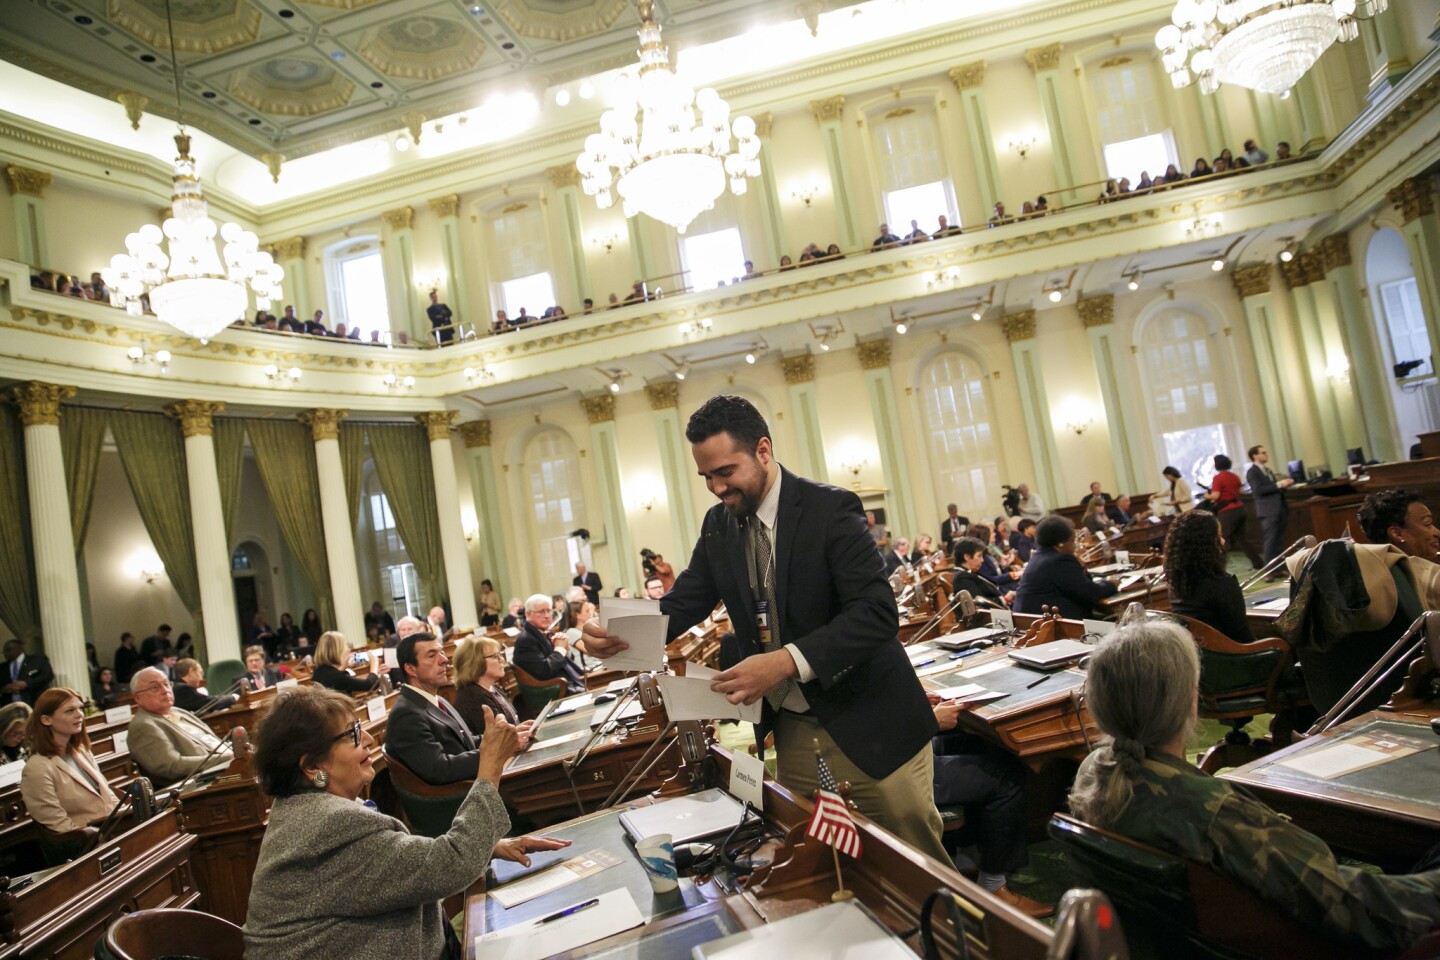 Andres Ramos collect the ballots voted by the members of the electoral college at the state Capitol in Sacramento.